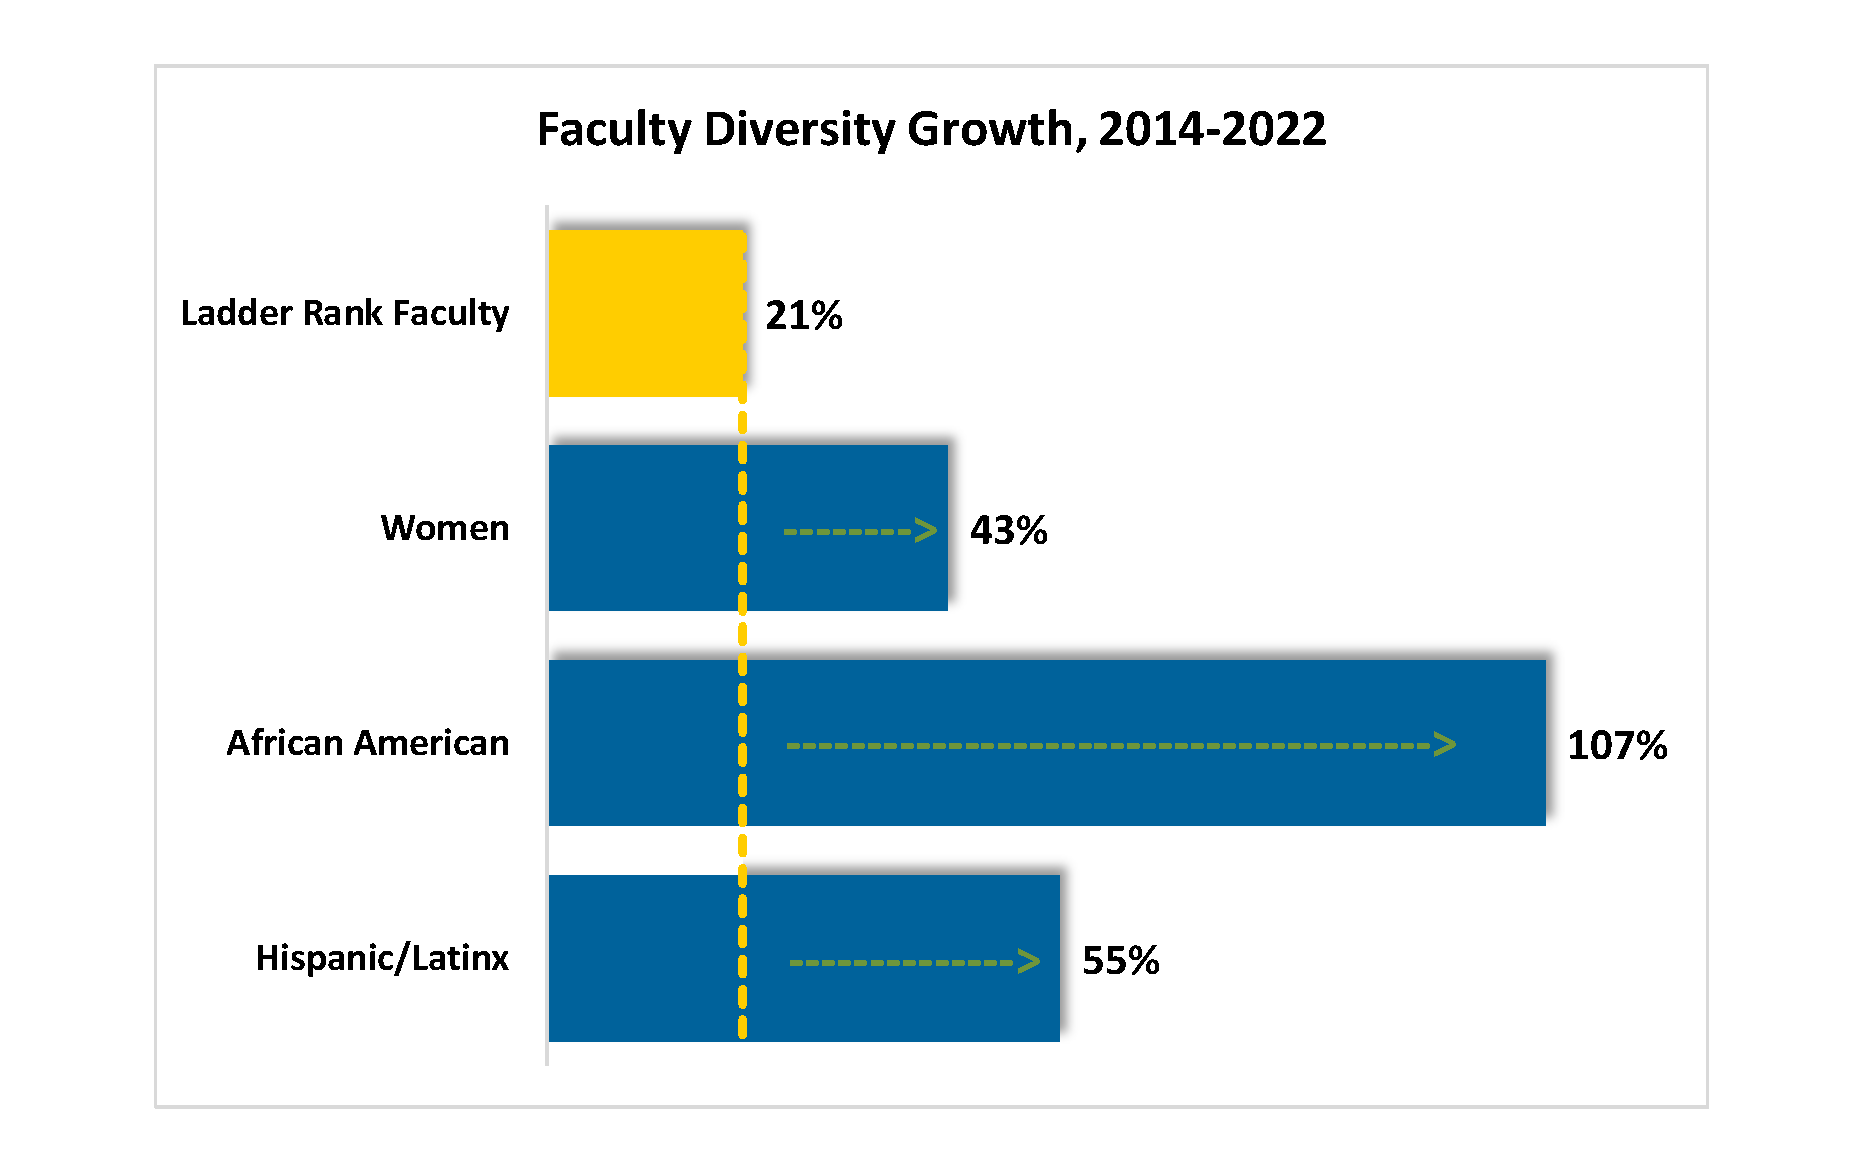 This shows faculty diversity growth at UC San Diego